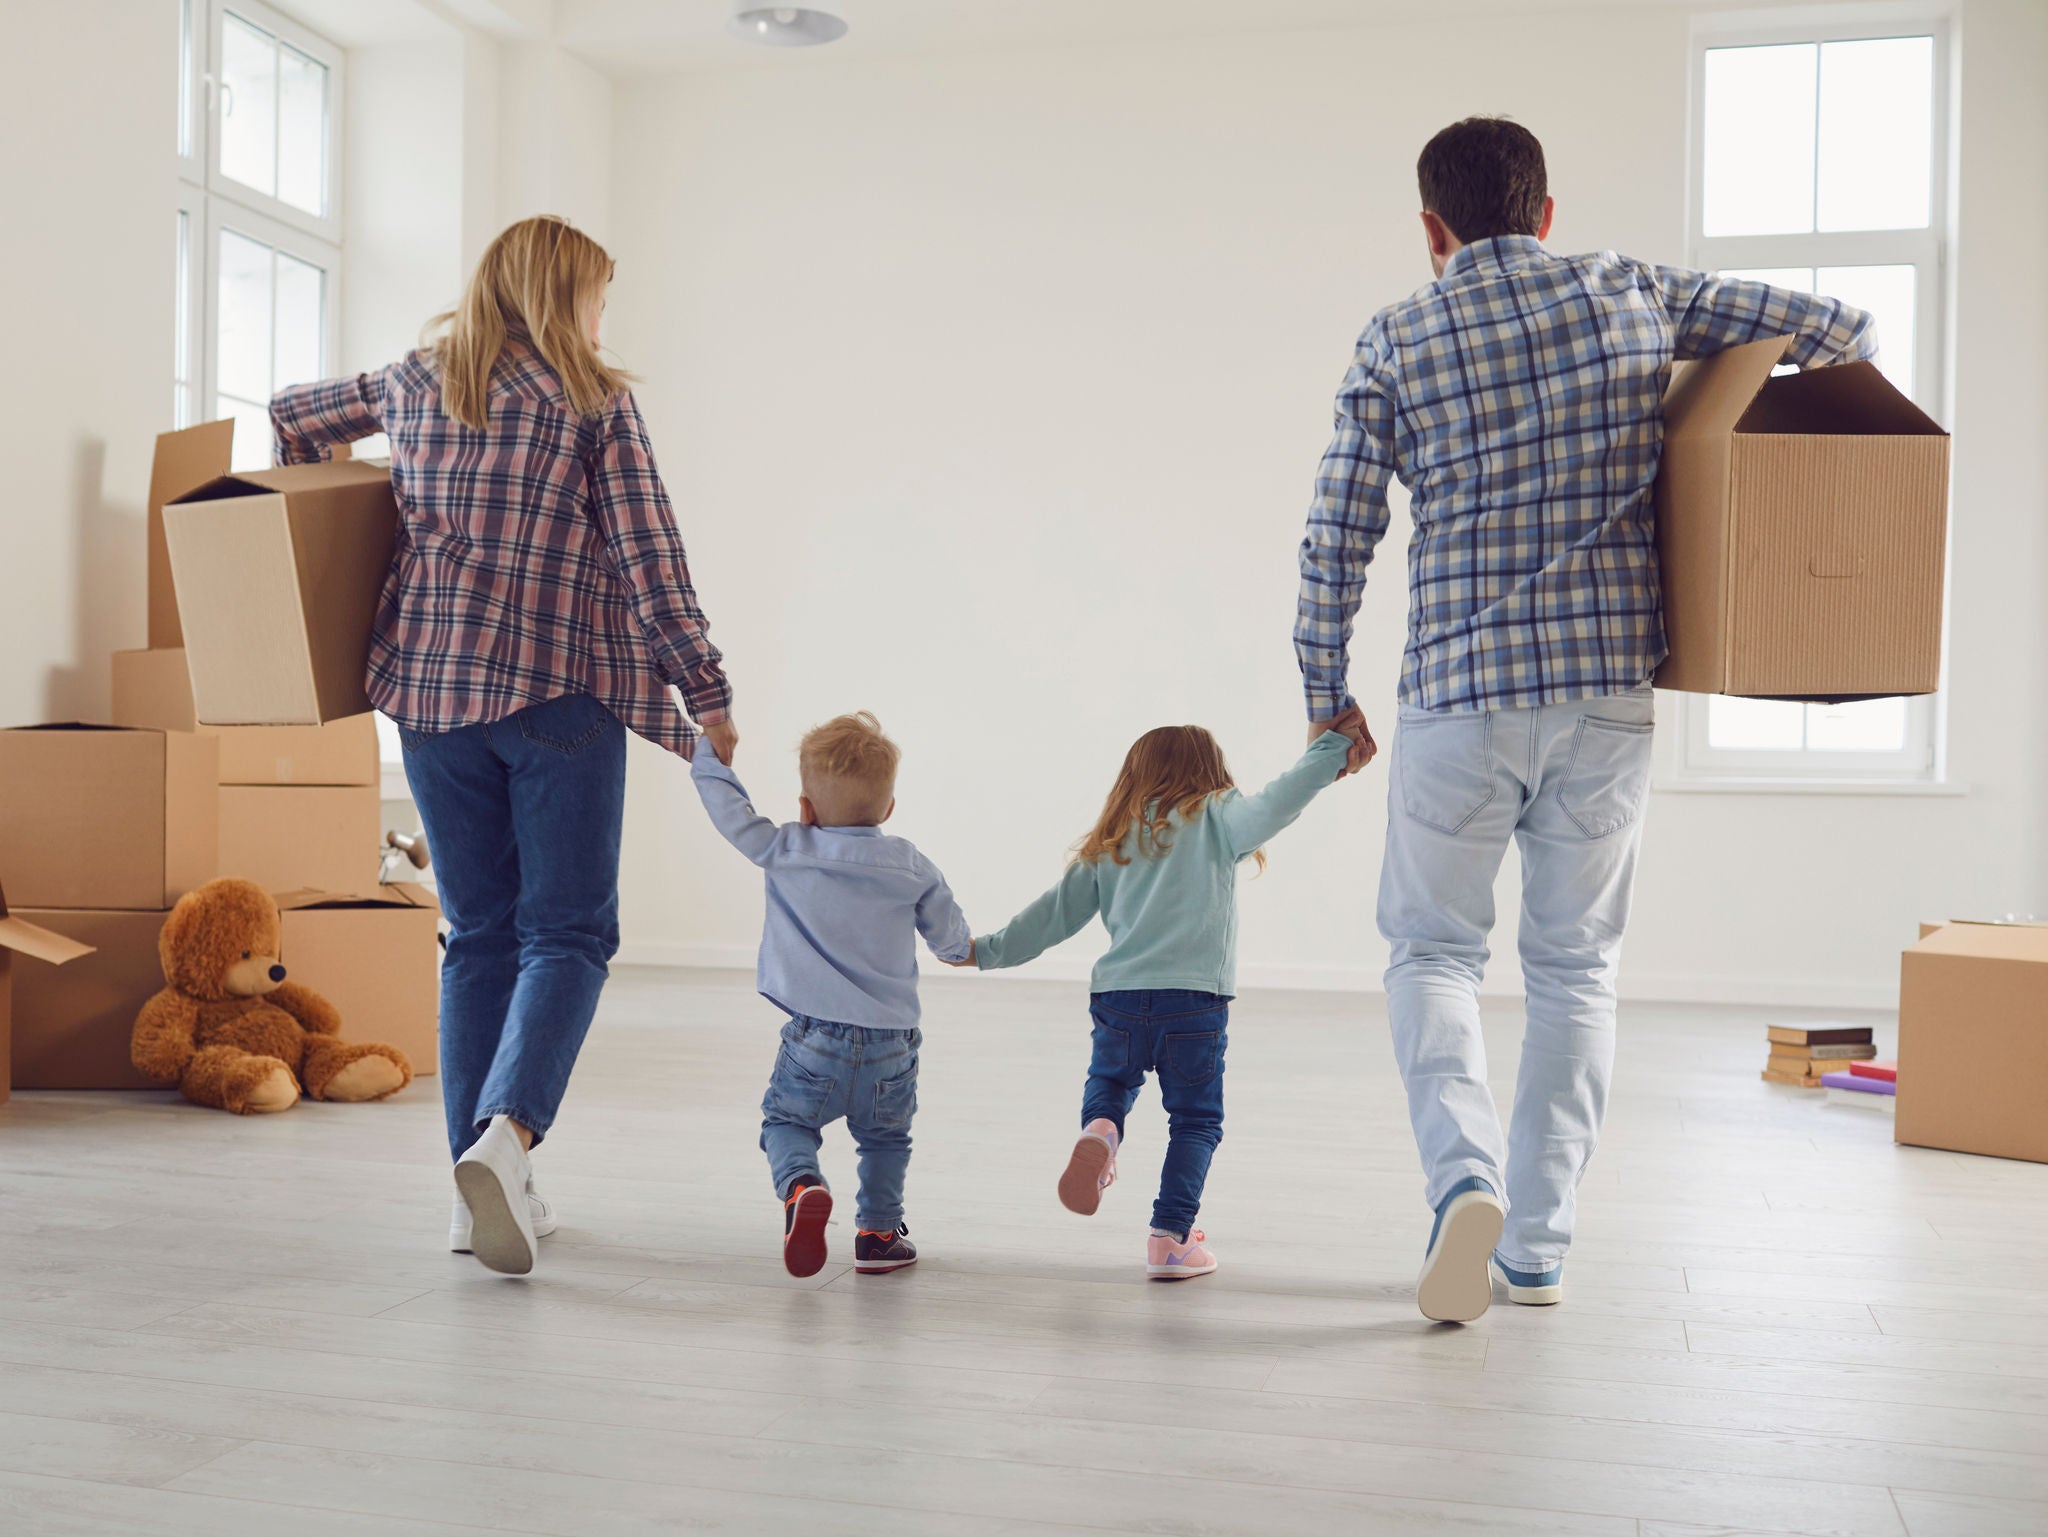 Happy family with children moving with boxes in a new apartment house. Relocation concept new house apartment rental housing.